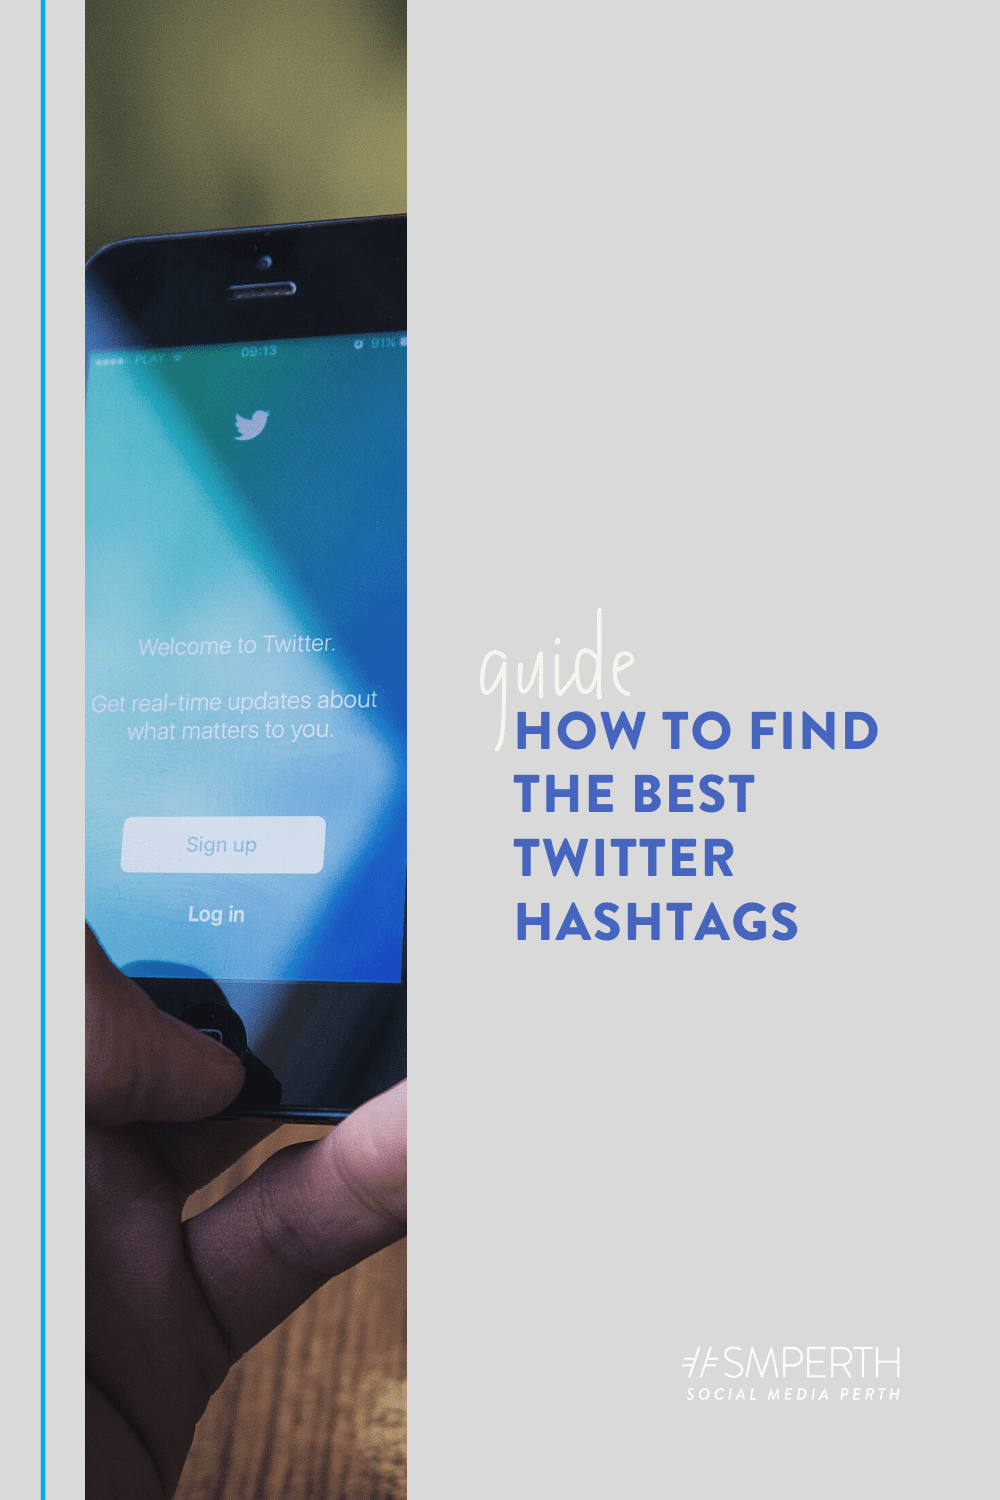 How to Find the Best Twitter Hashtags